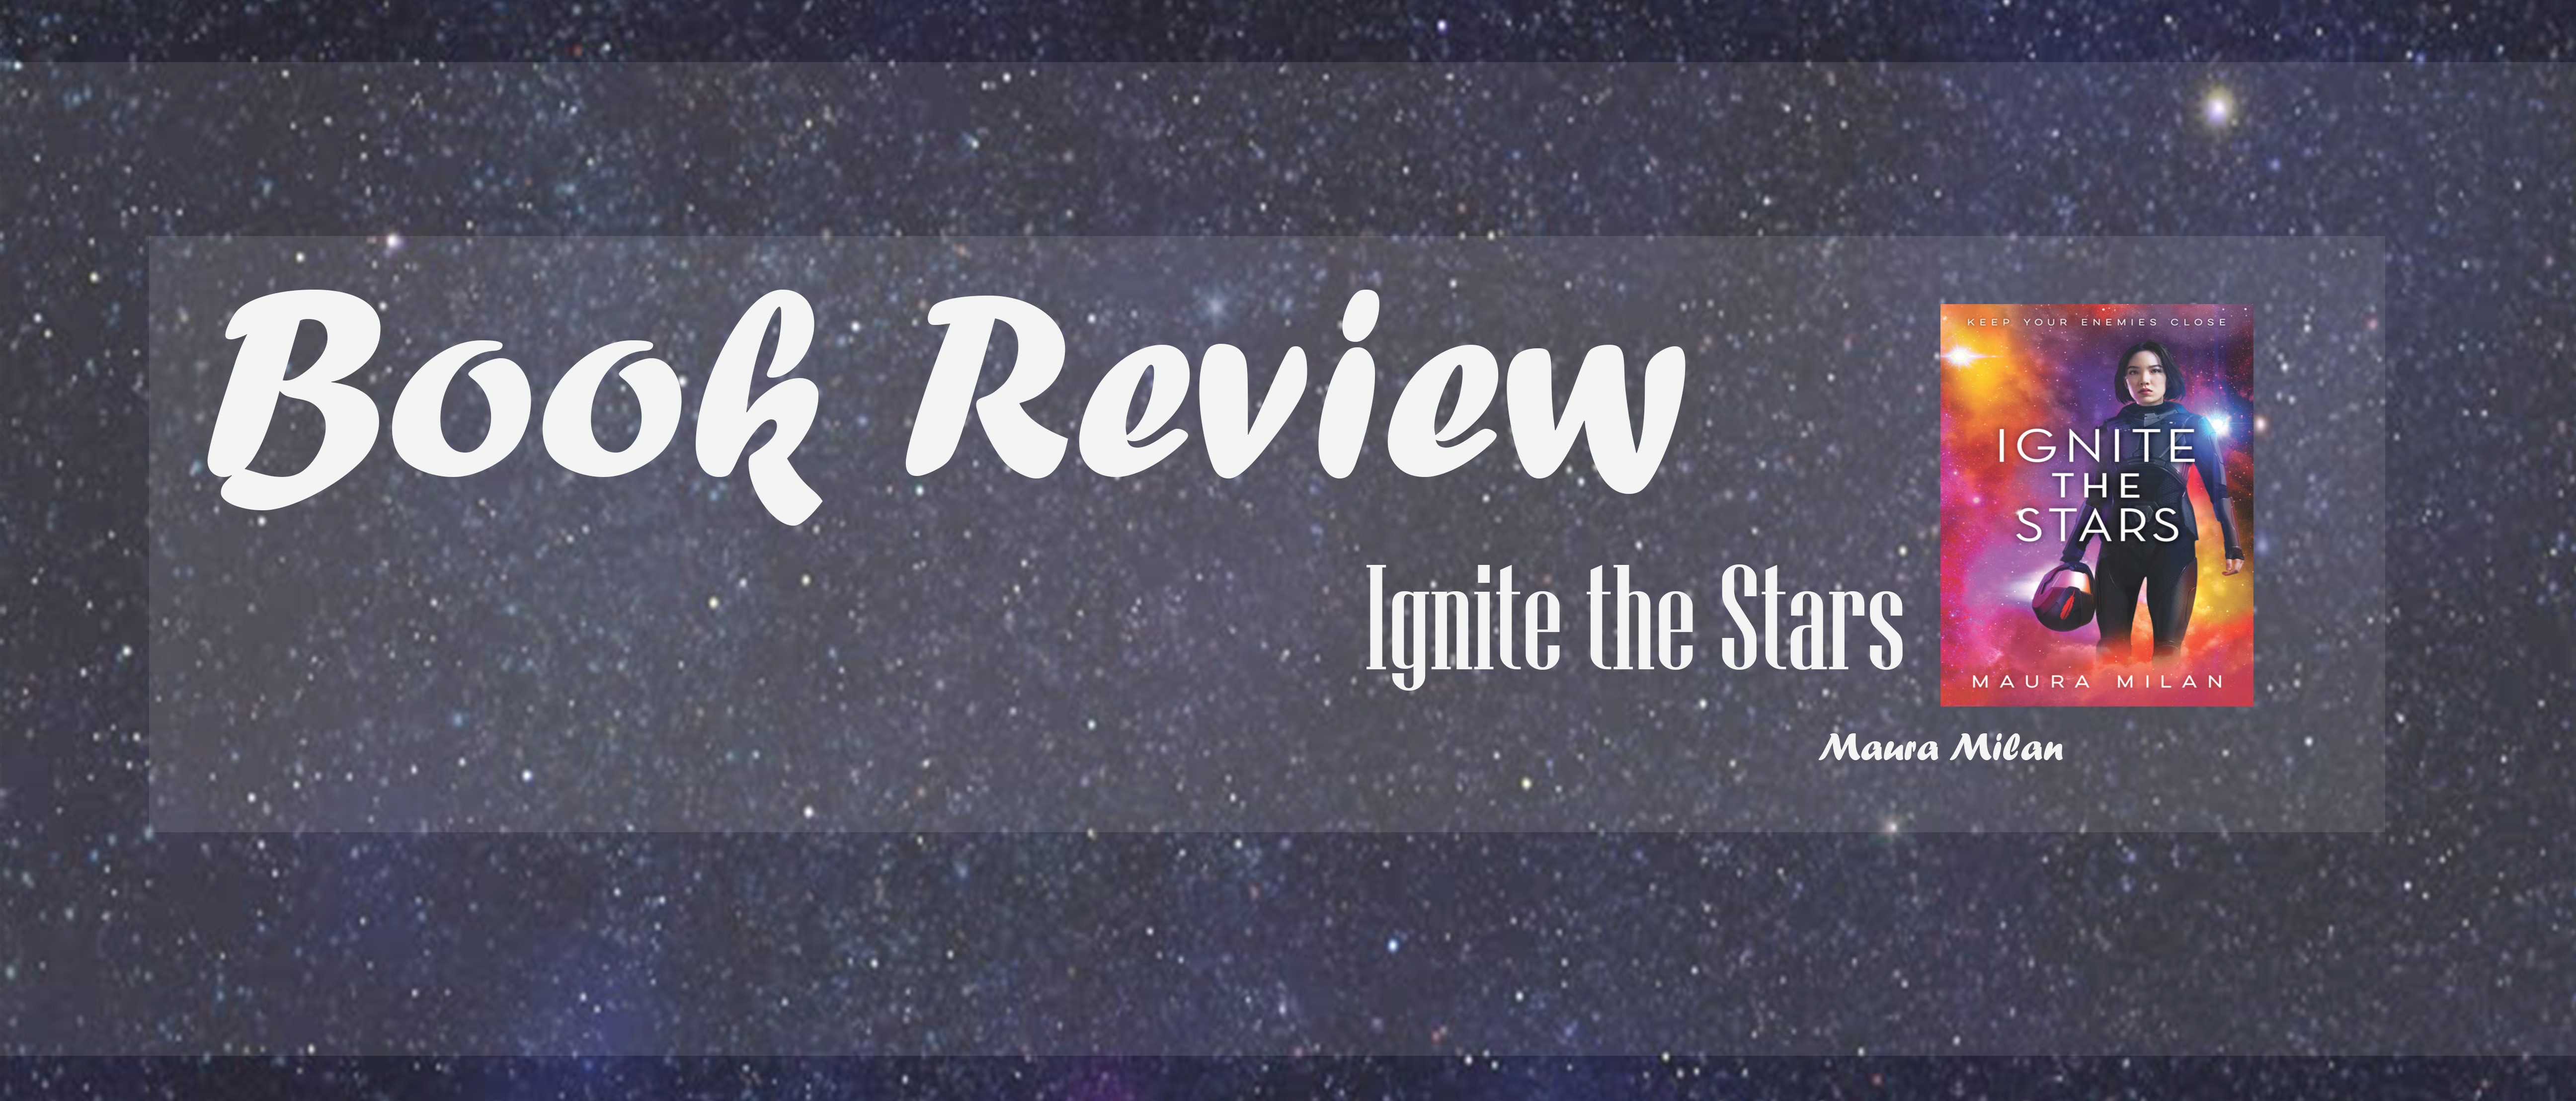 Book review: ignite the stars by maura milan